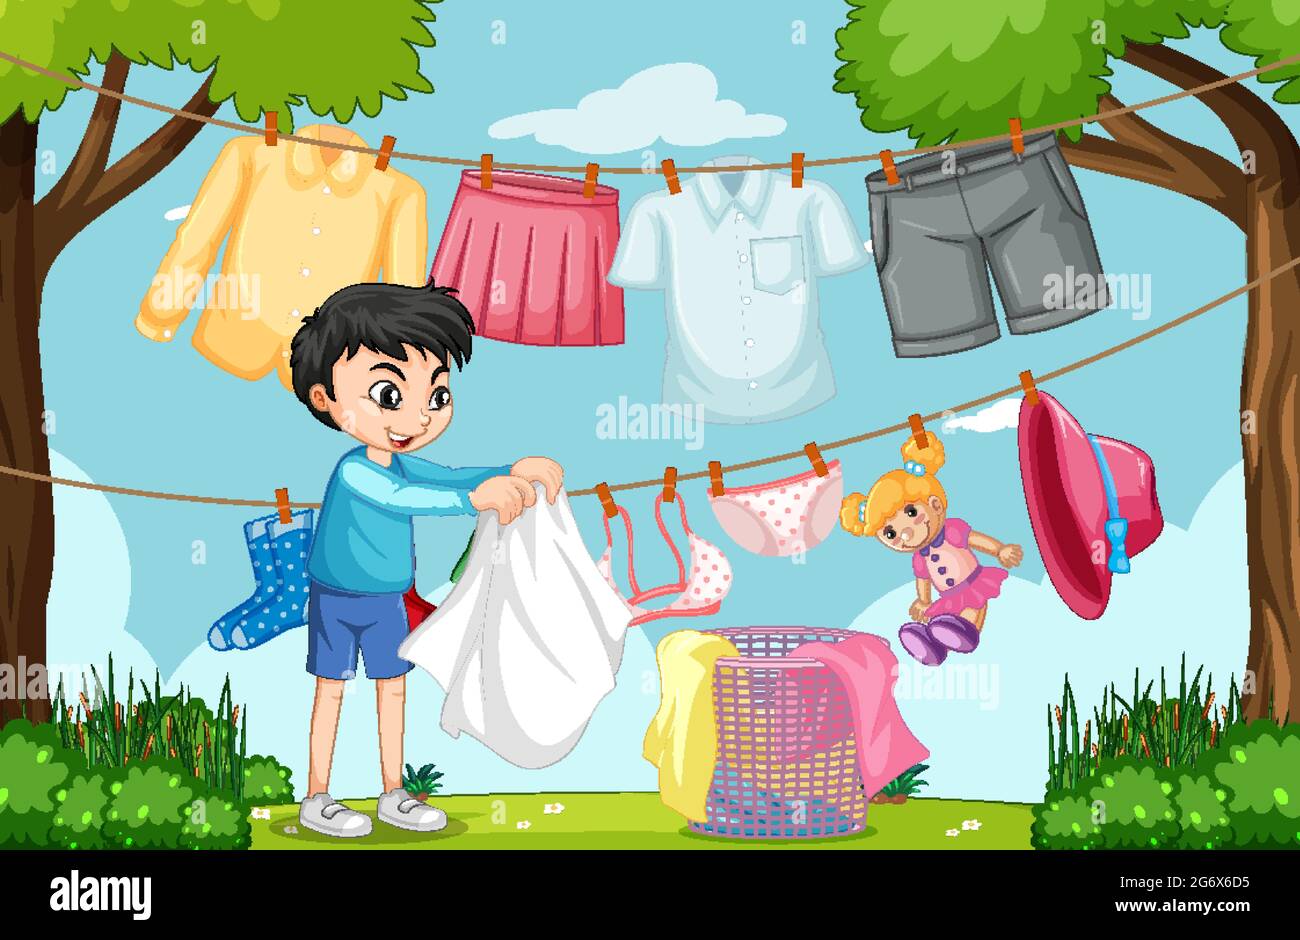 Outdoor scene with a boy hanging clothes on clotheslines illustration Stock Vector